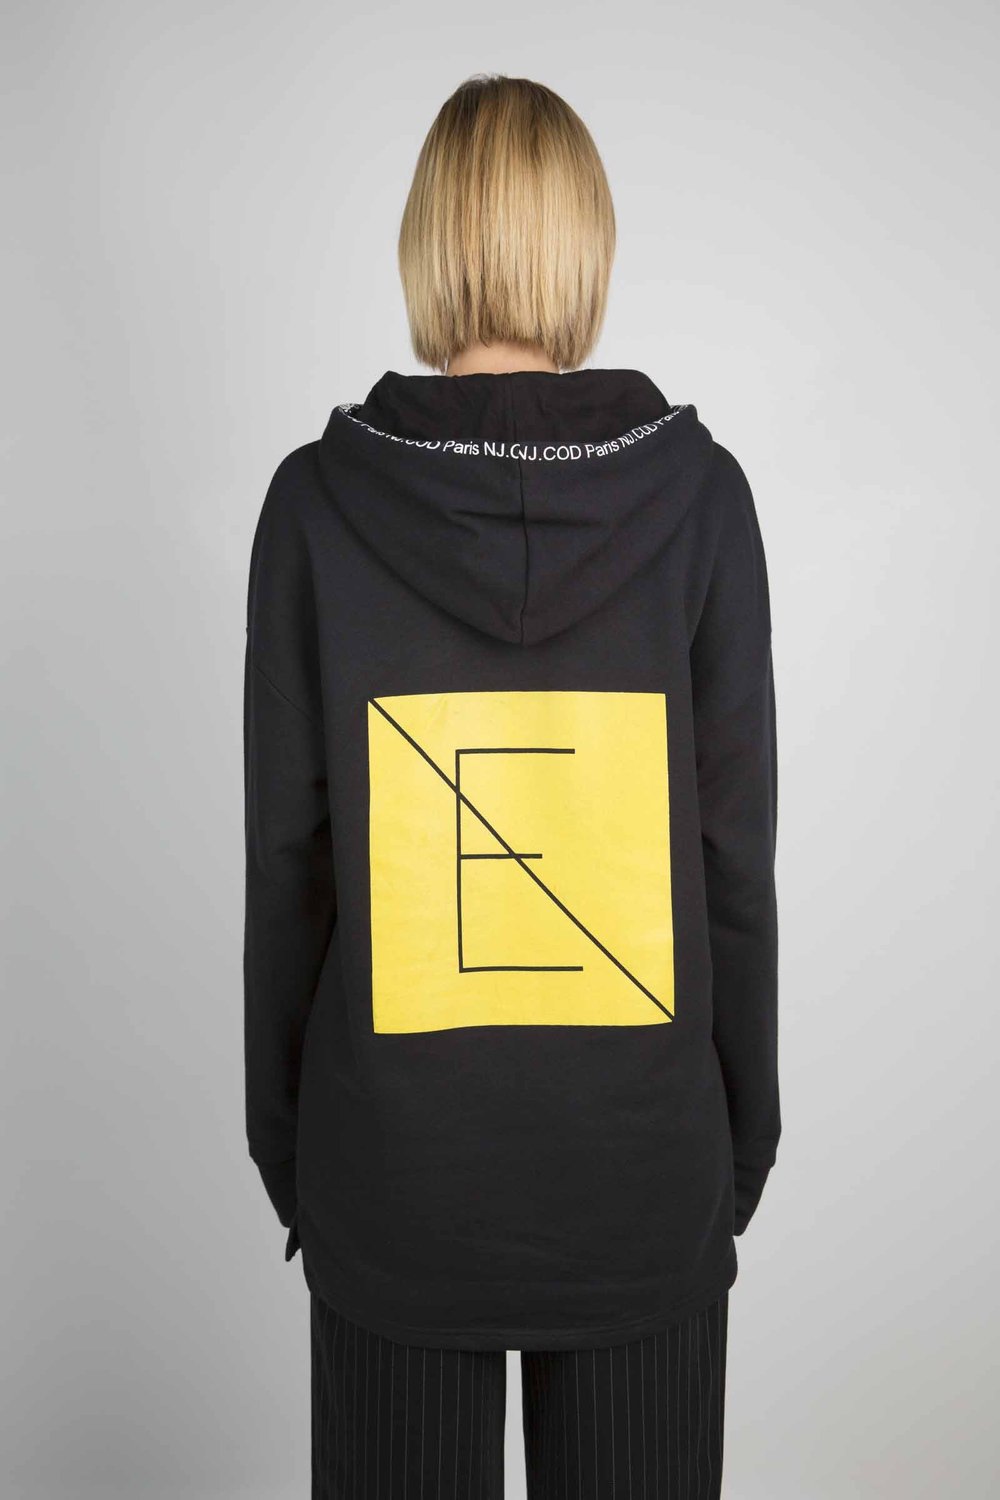 Image of NJ.COD - Hoodie Without E <s>â‚¬75.00</s>